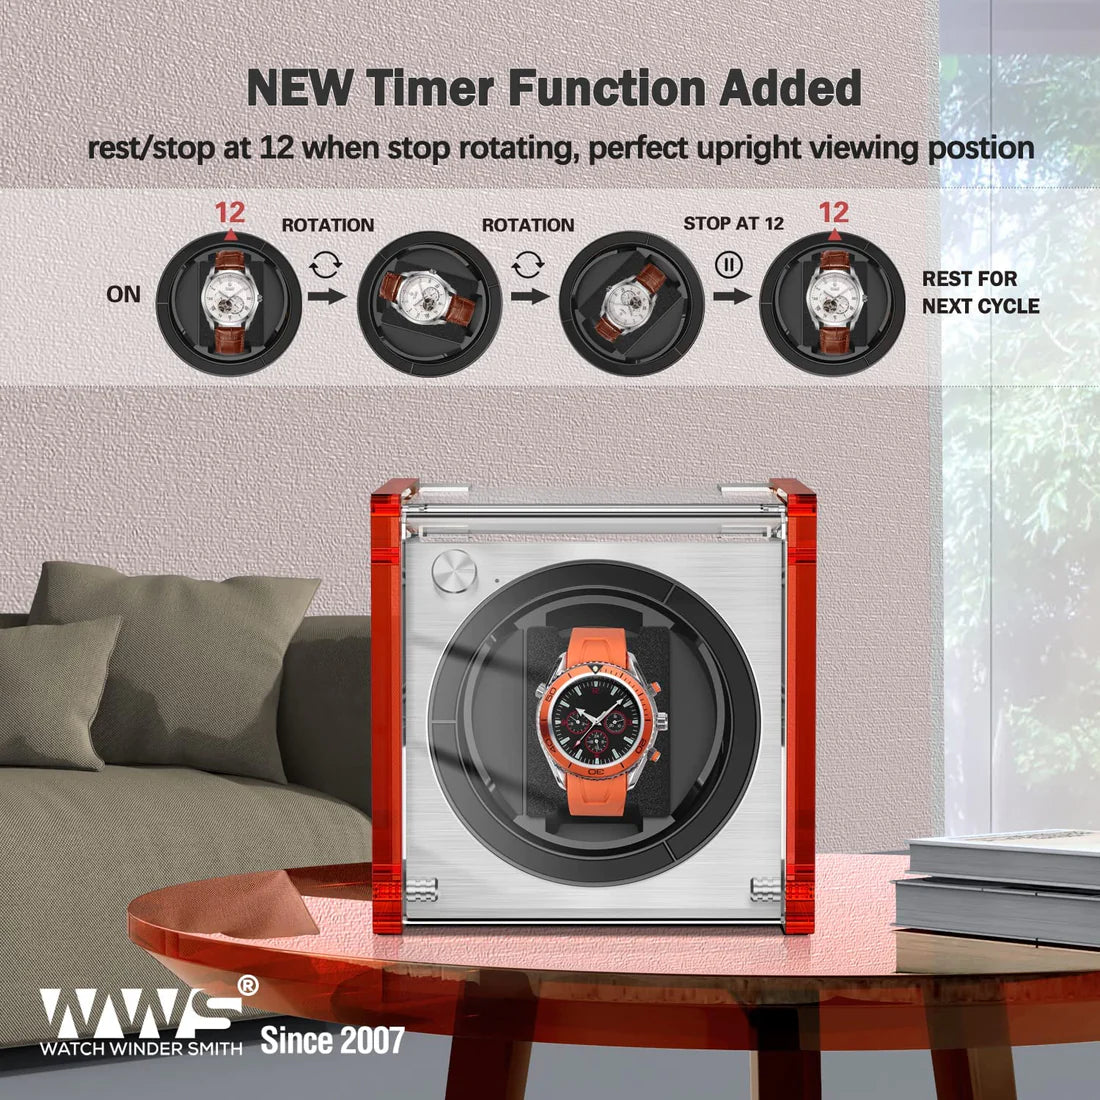 Elevate Timepiece Care: Premium Watch Winder and Watch Winder Box Solutions